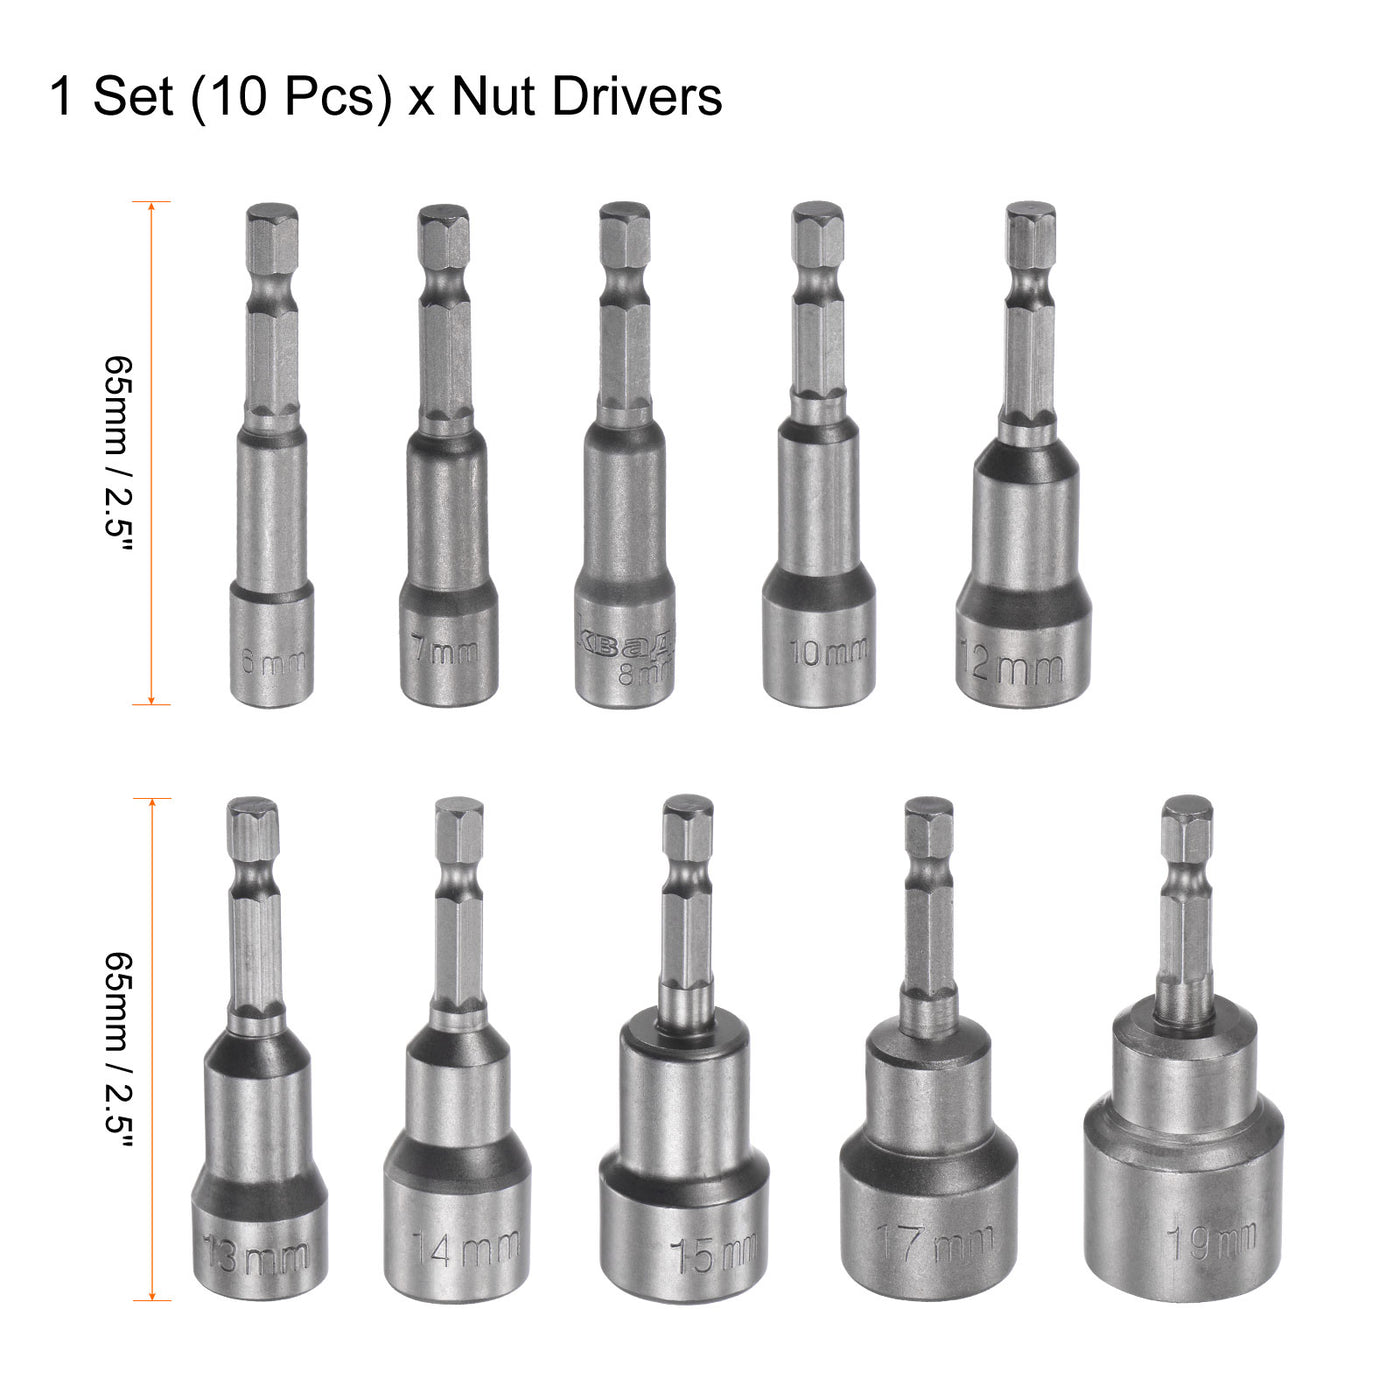 uxcell Uxcell 1/4" Quick-Change Hex Shank 6-19mm Magnetic Nut Driver Bit Set of 10 Piece, CR-V